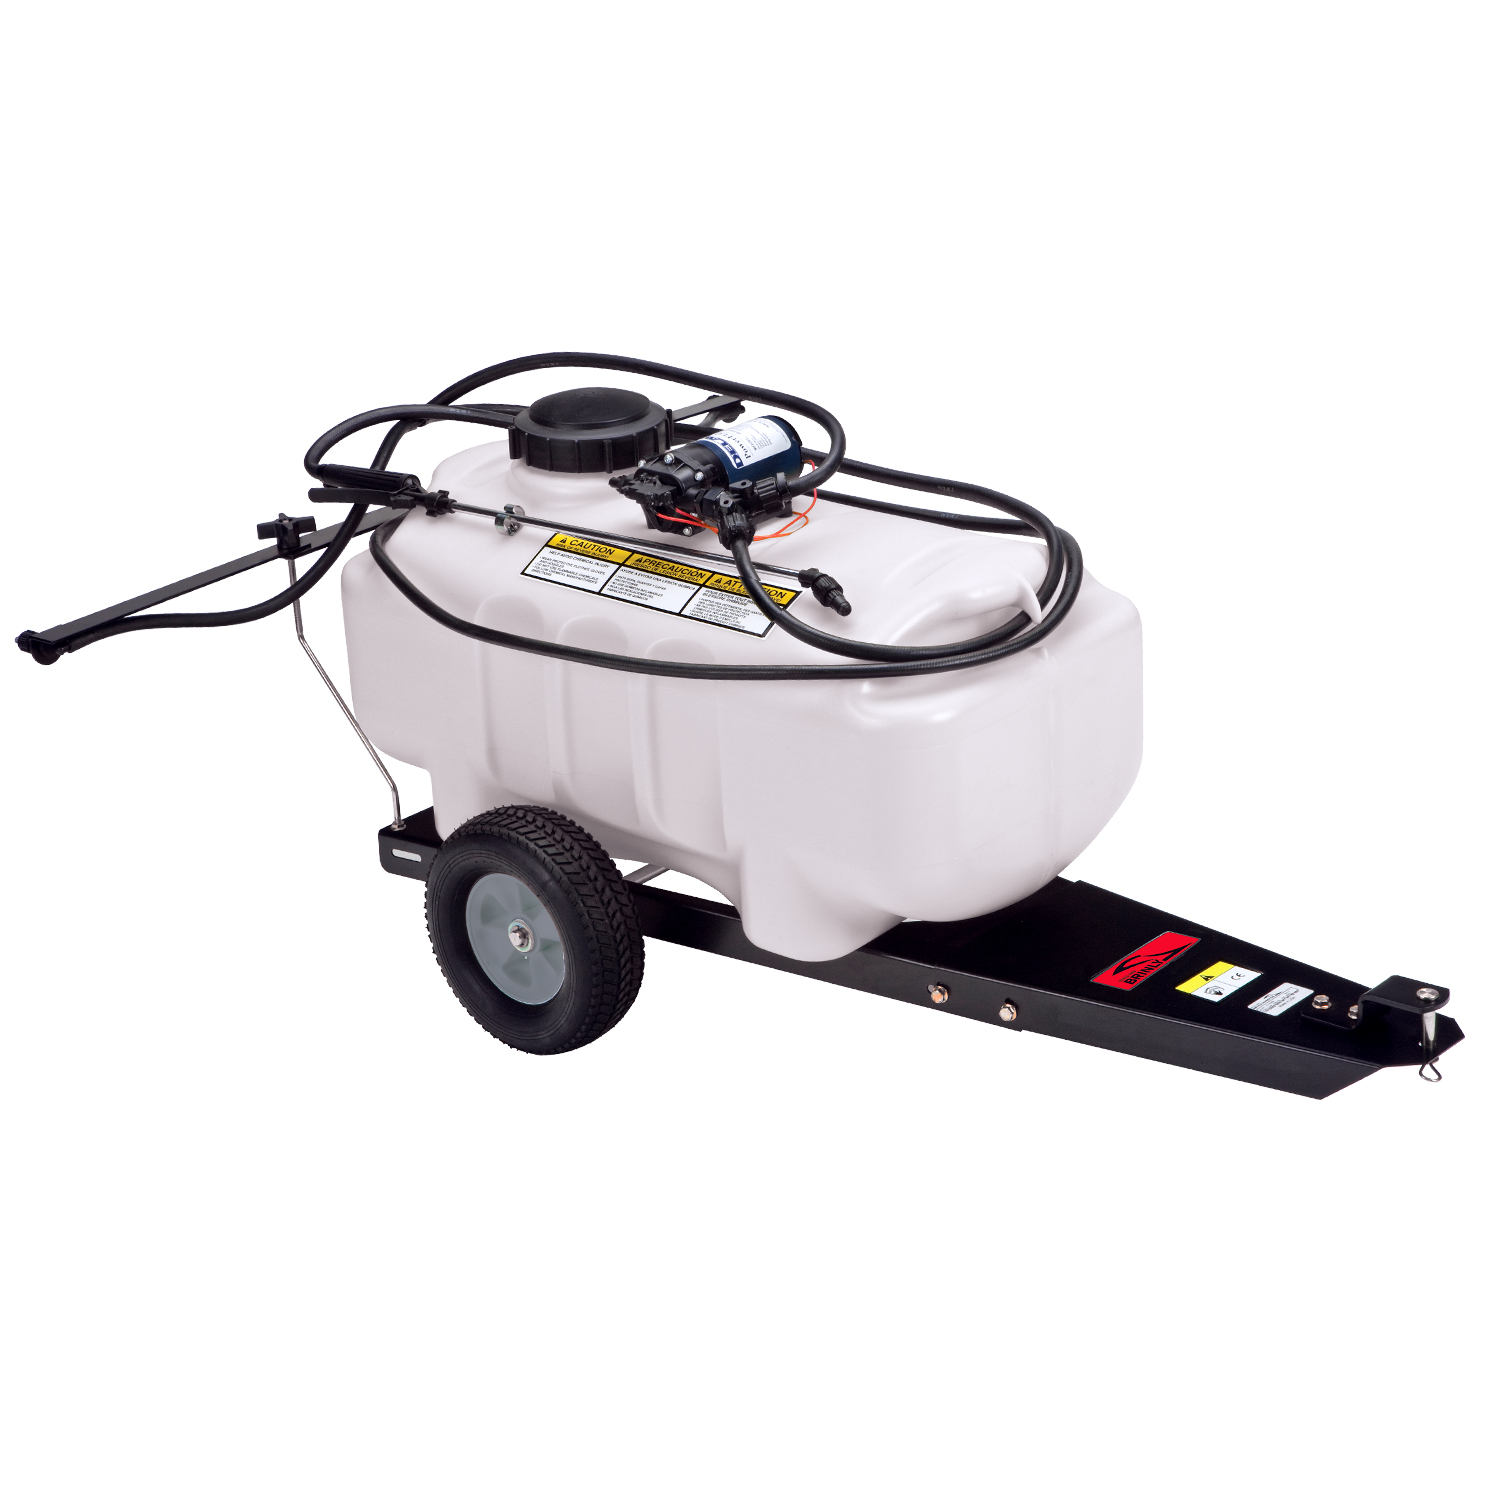 25 Gallon Tow Behind Sprayer St 25bh Brinly Lawn And Garden Attachments 6498